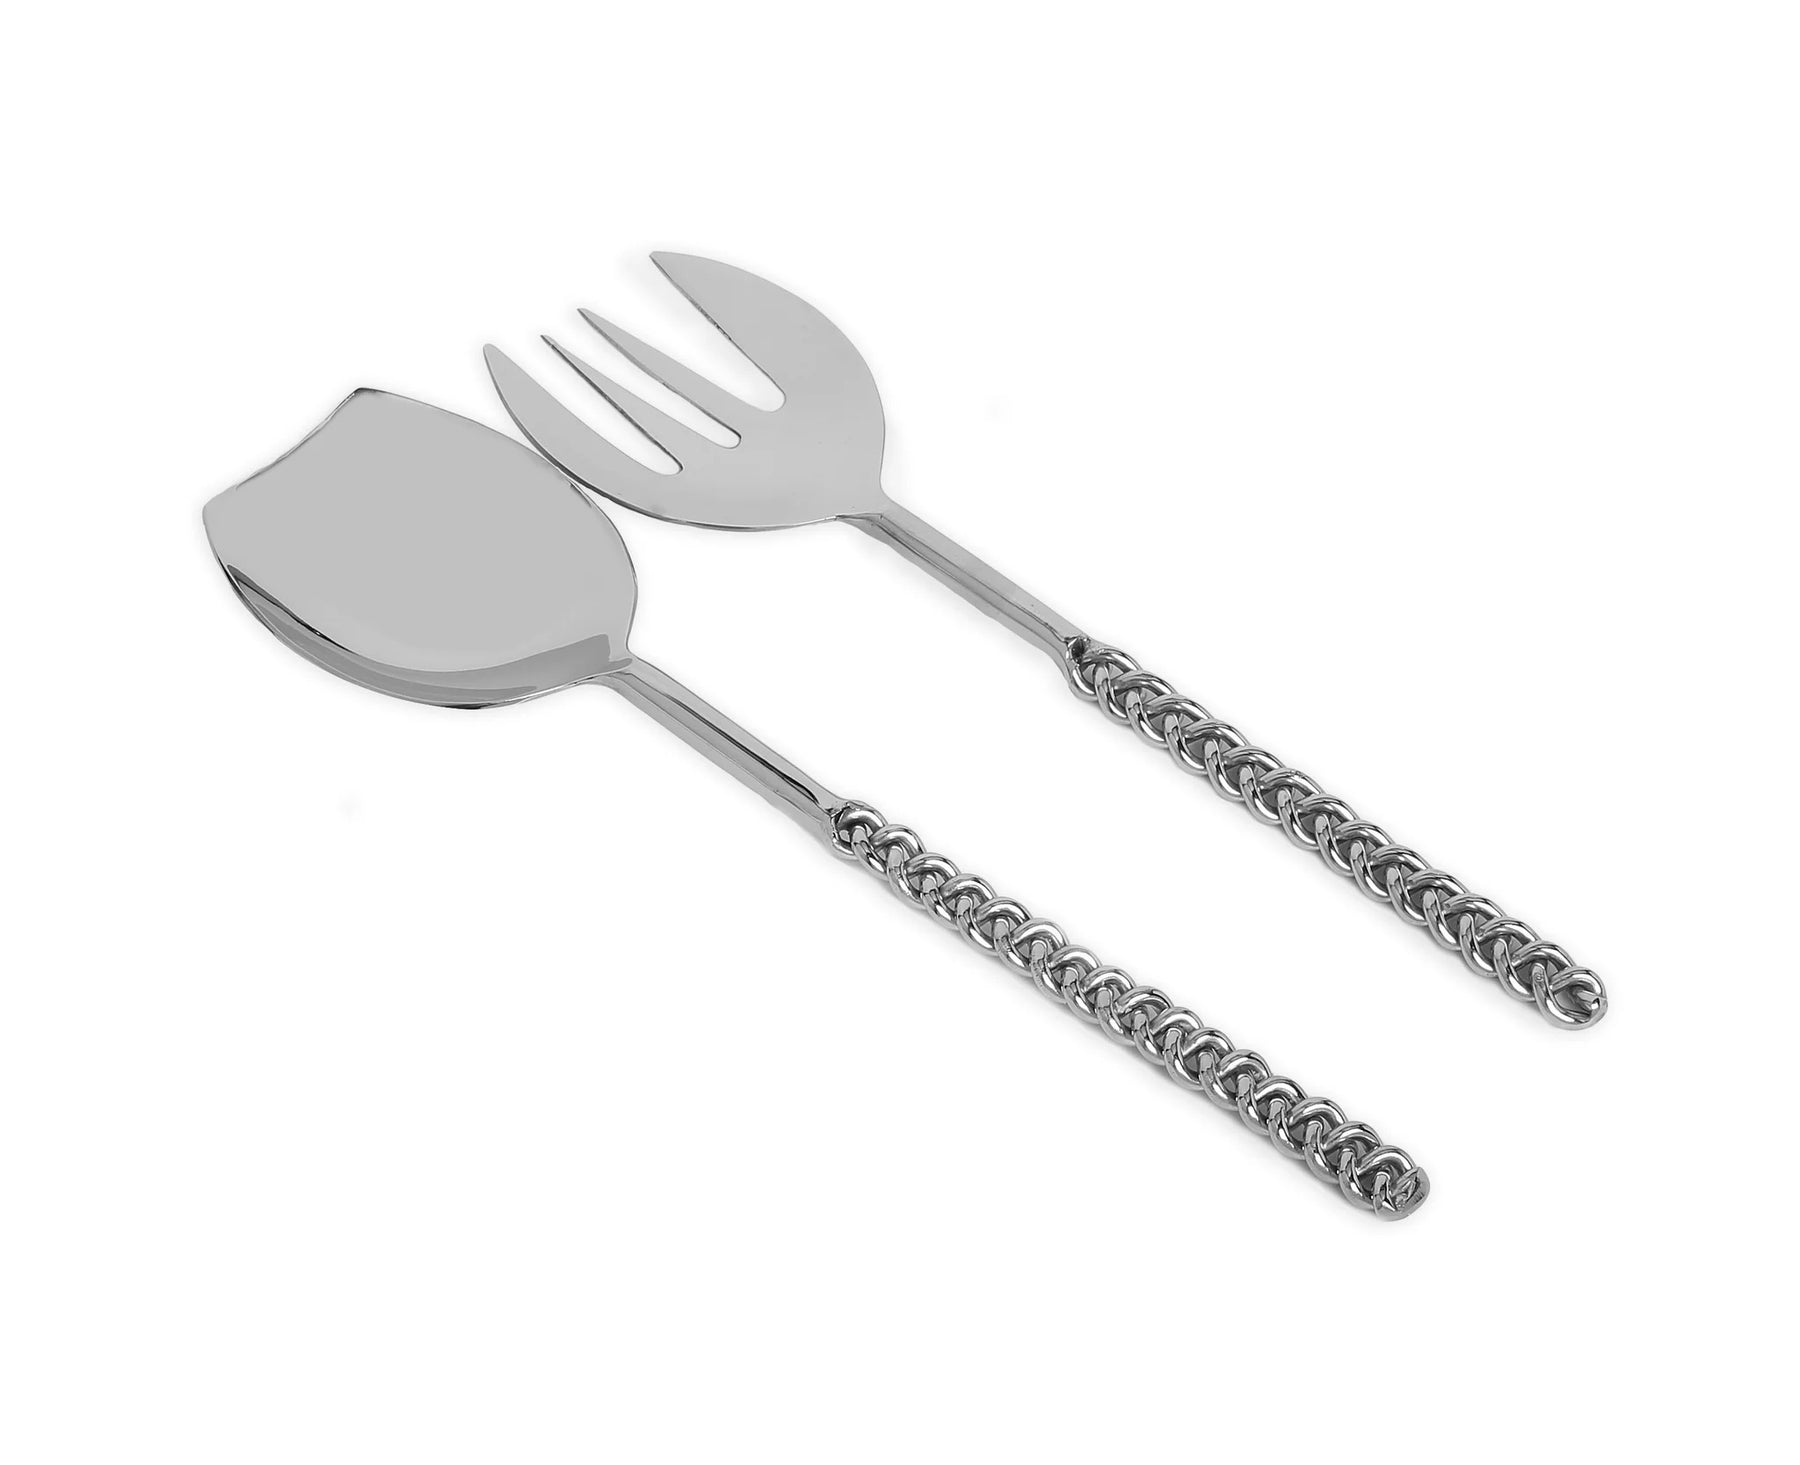 Classic Touch Set of 2 Salad Servers Stainless Steel with Silver Twisted Handles